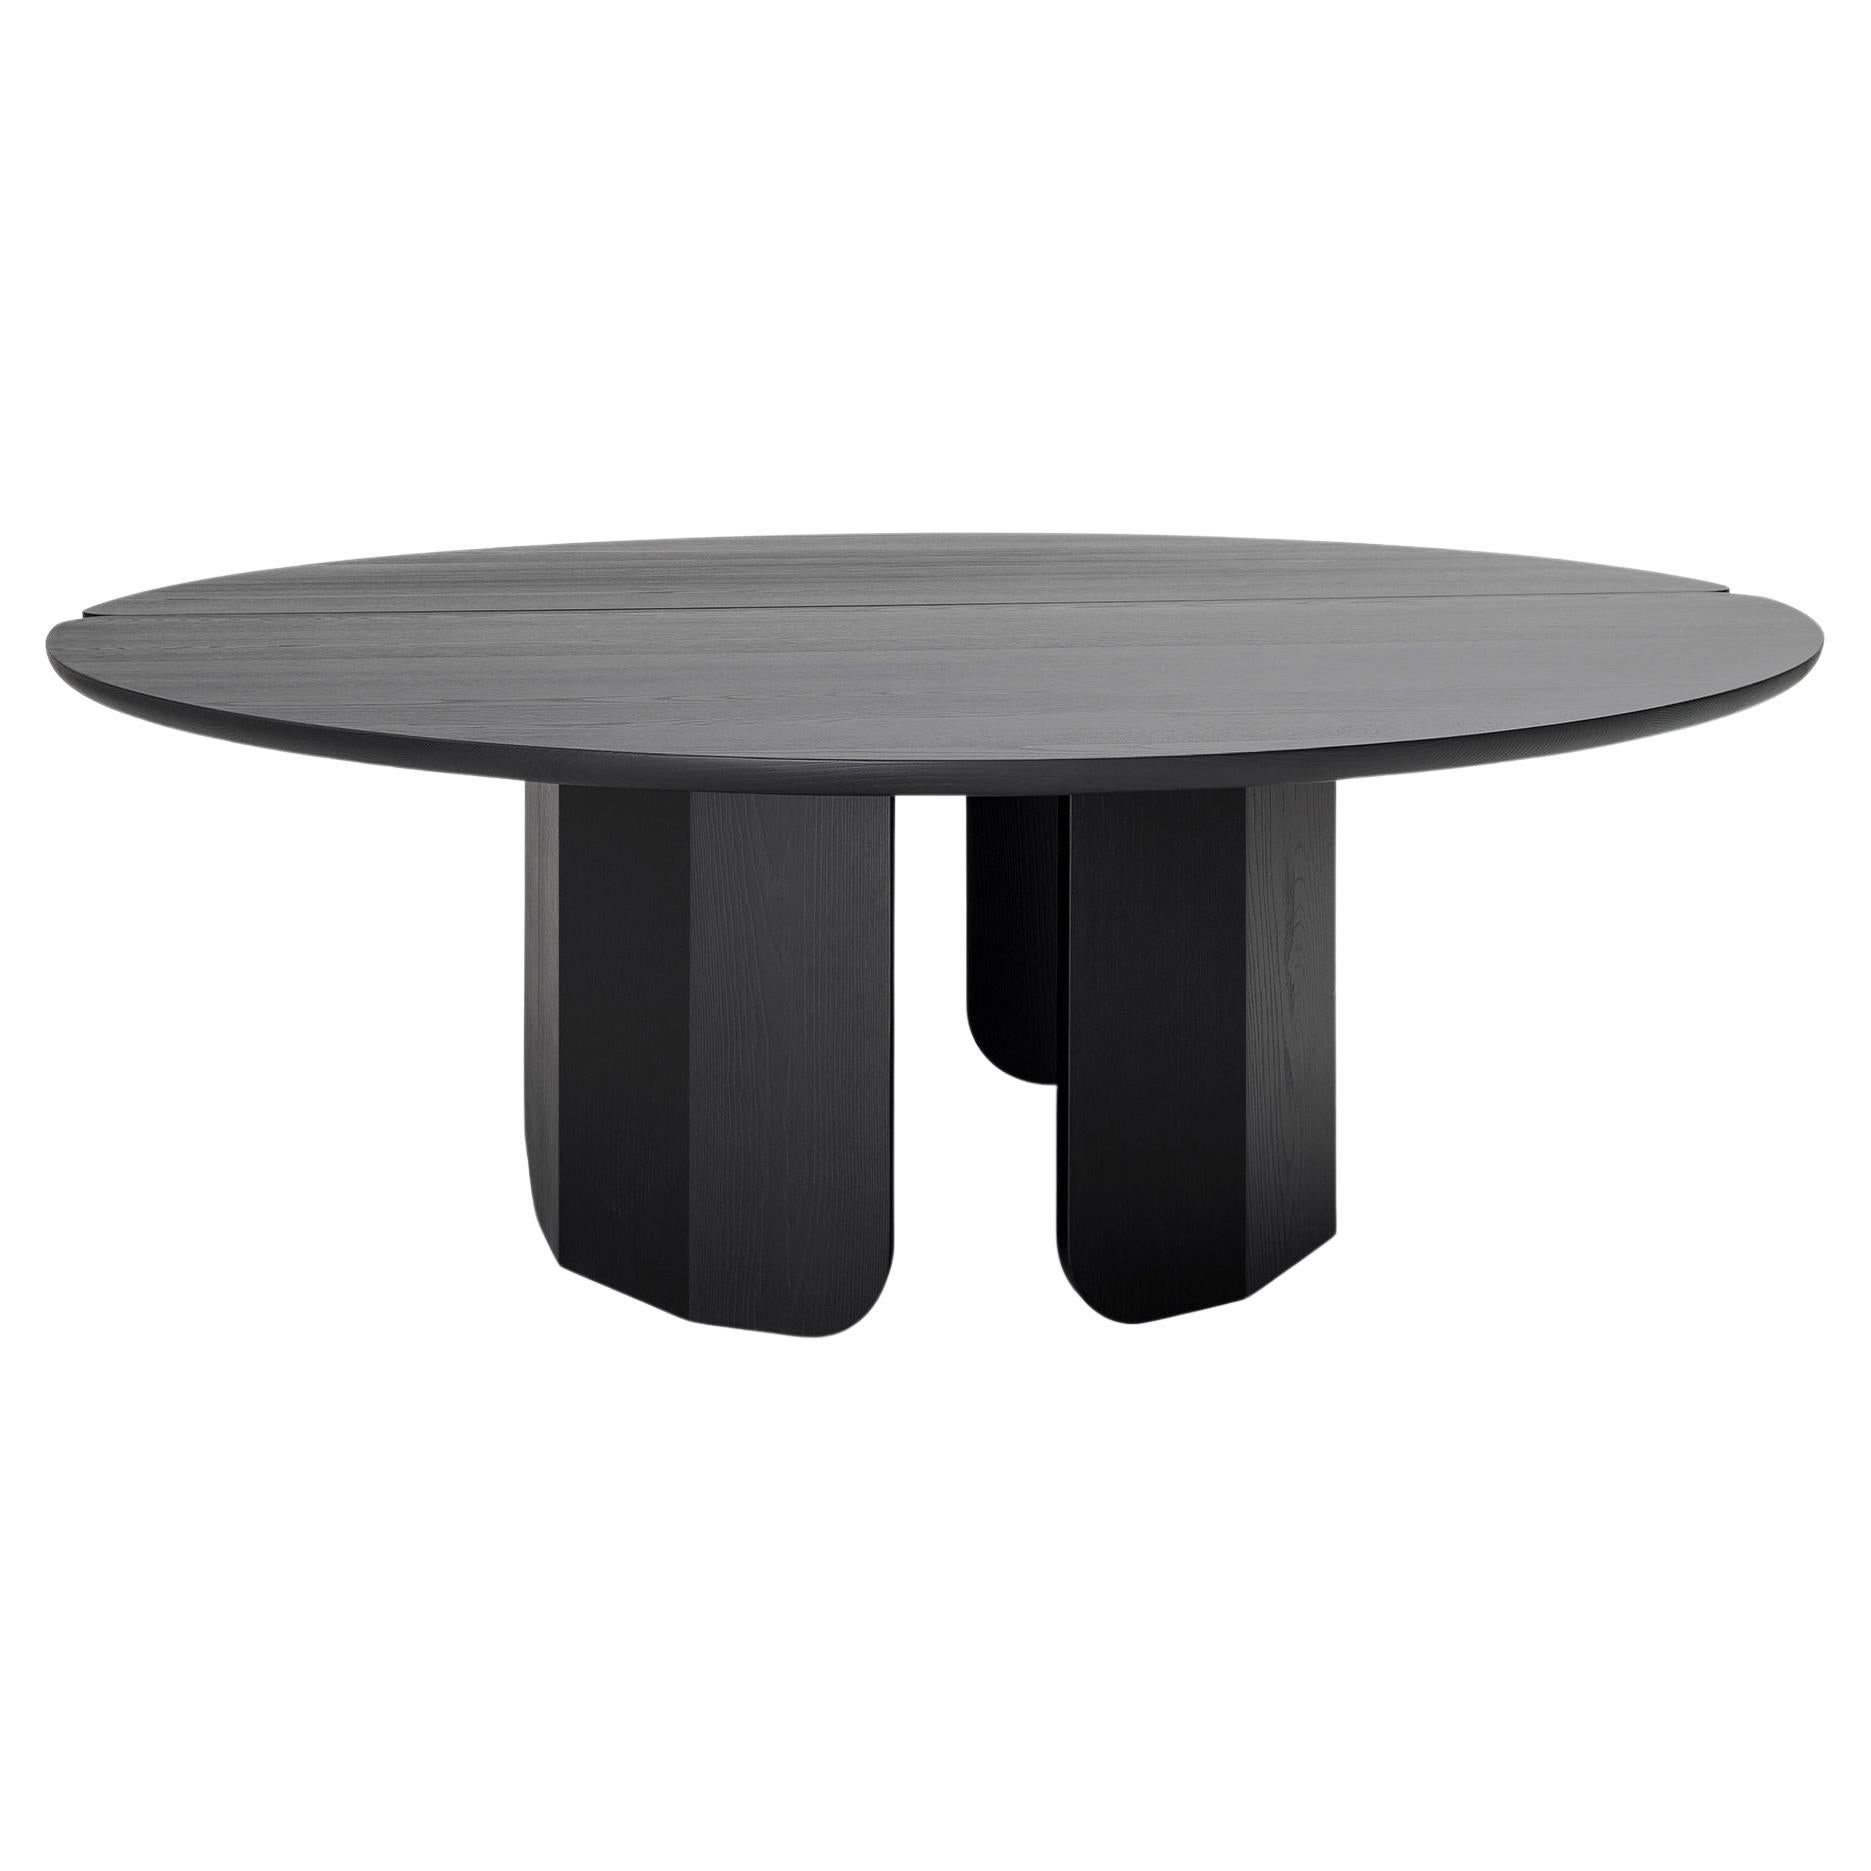 Sem Neolitique Collection Huli Table by Motta Architecture